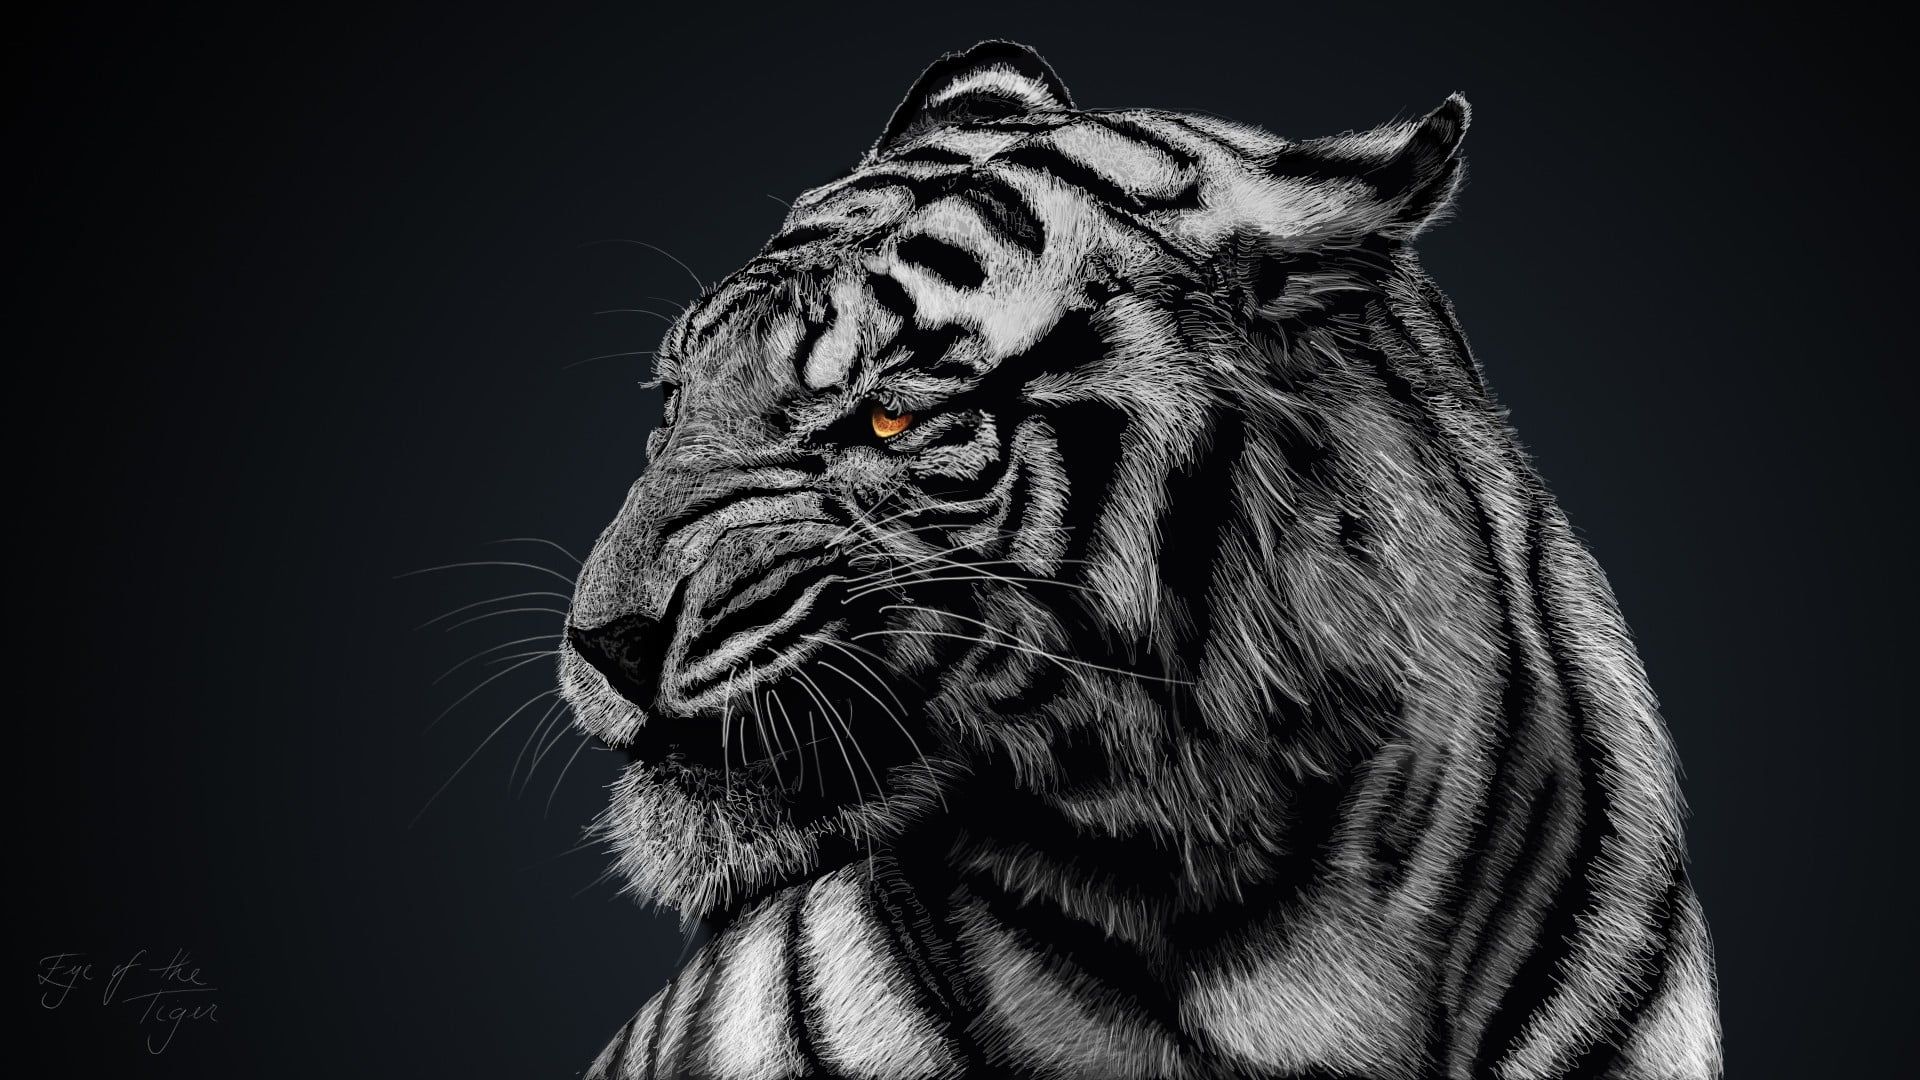 gray and black tiger, greyscale photo of tiger #animals #tiger white tigers #nature P #wallpaper #hdwallpap. Tiger artwork, Tiger wallpaper, Tiger wallpaper